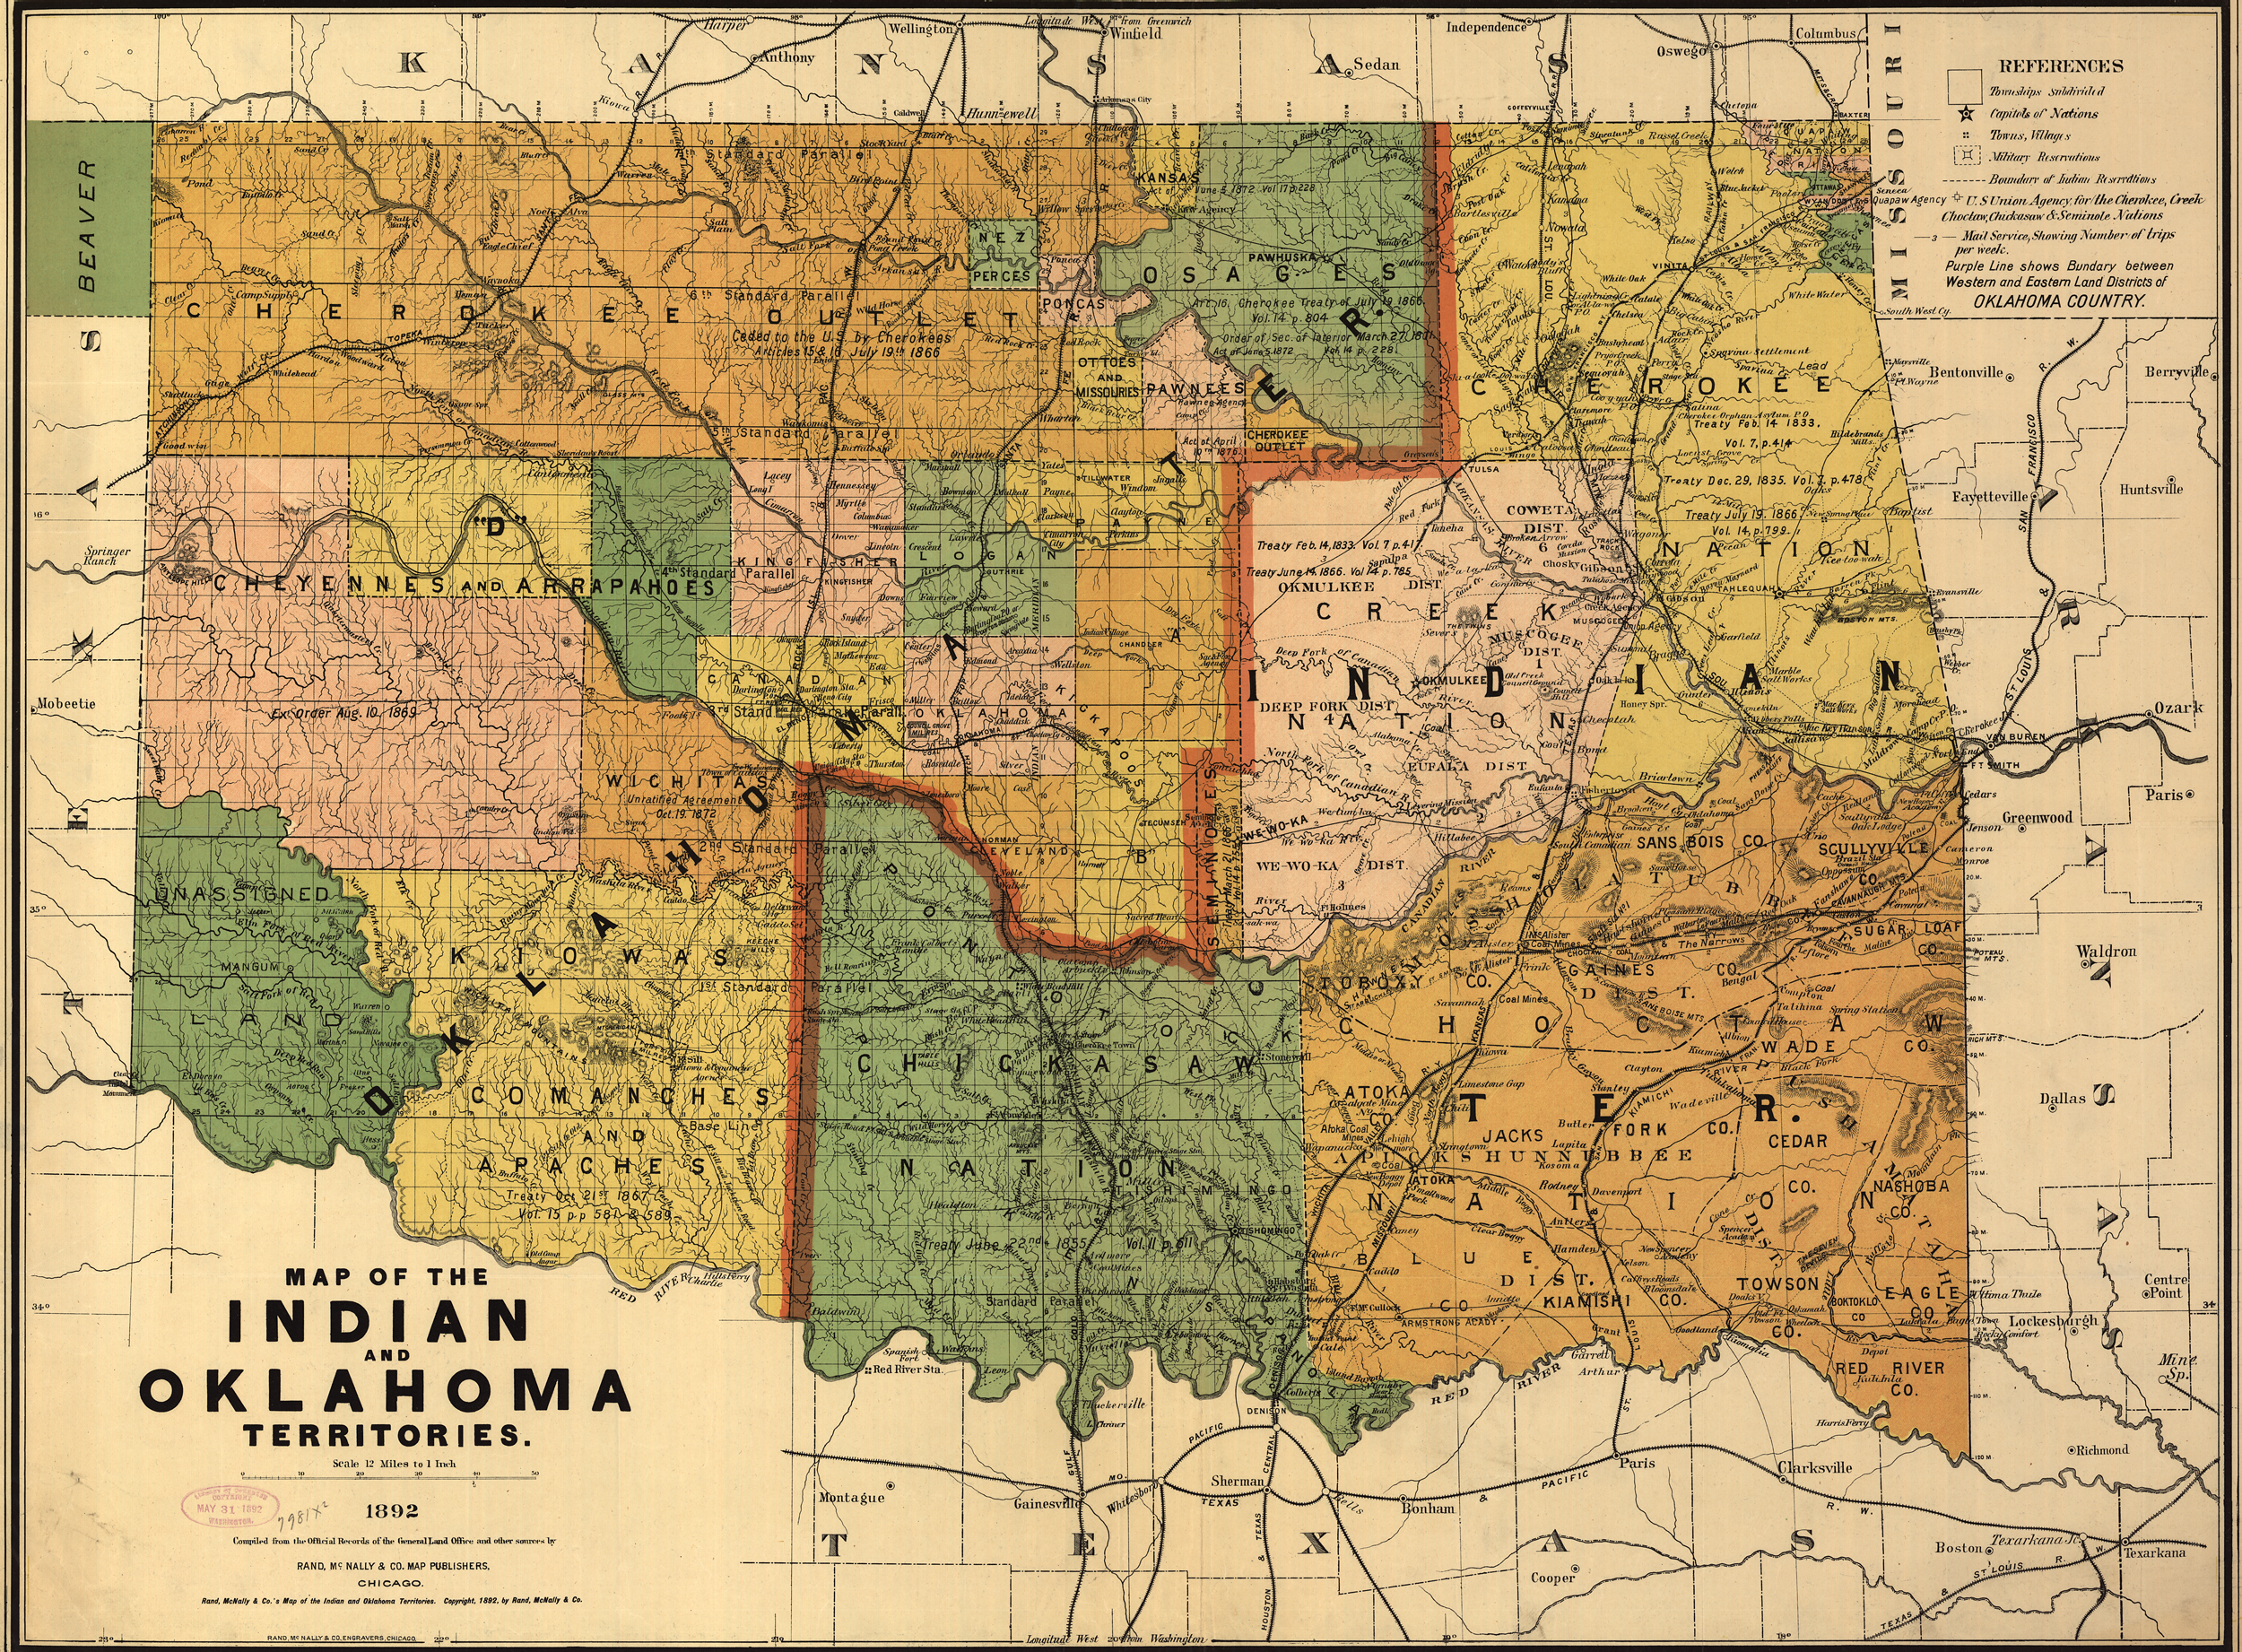 Map of the Indian and Oklahoma Territories, 1892